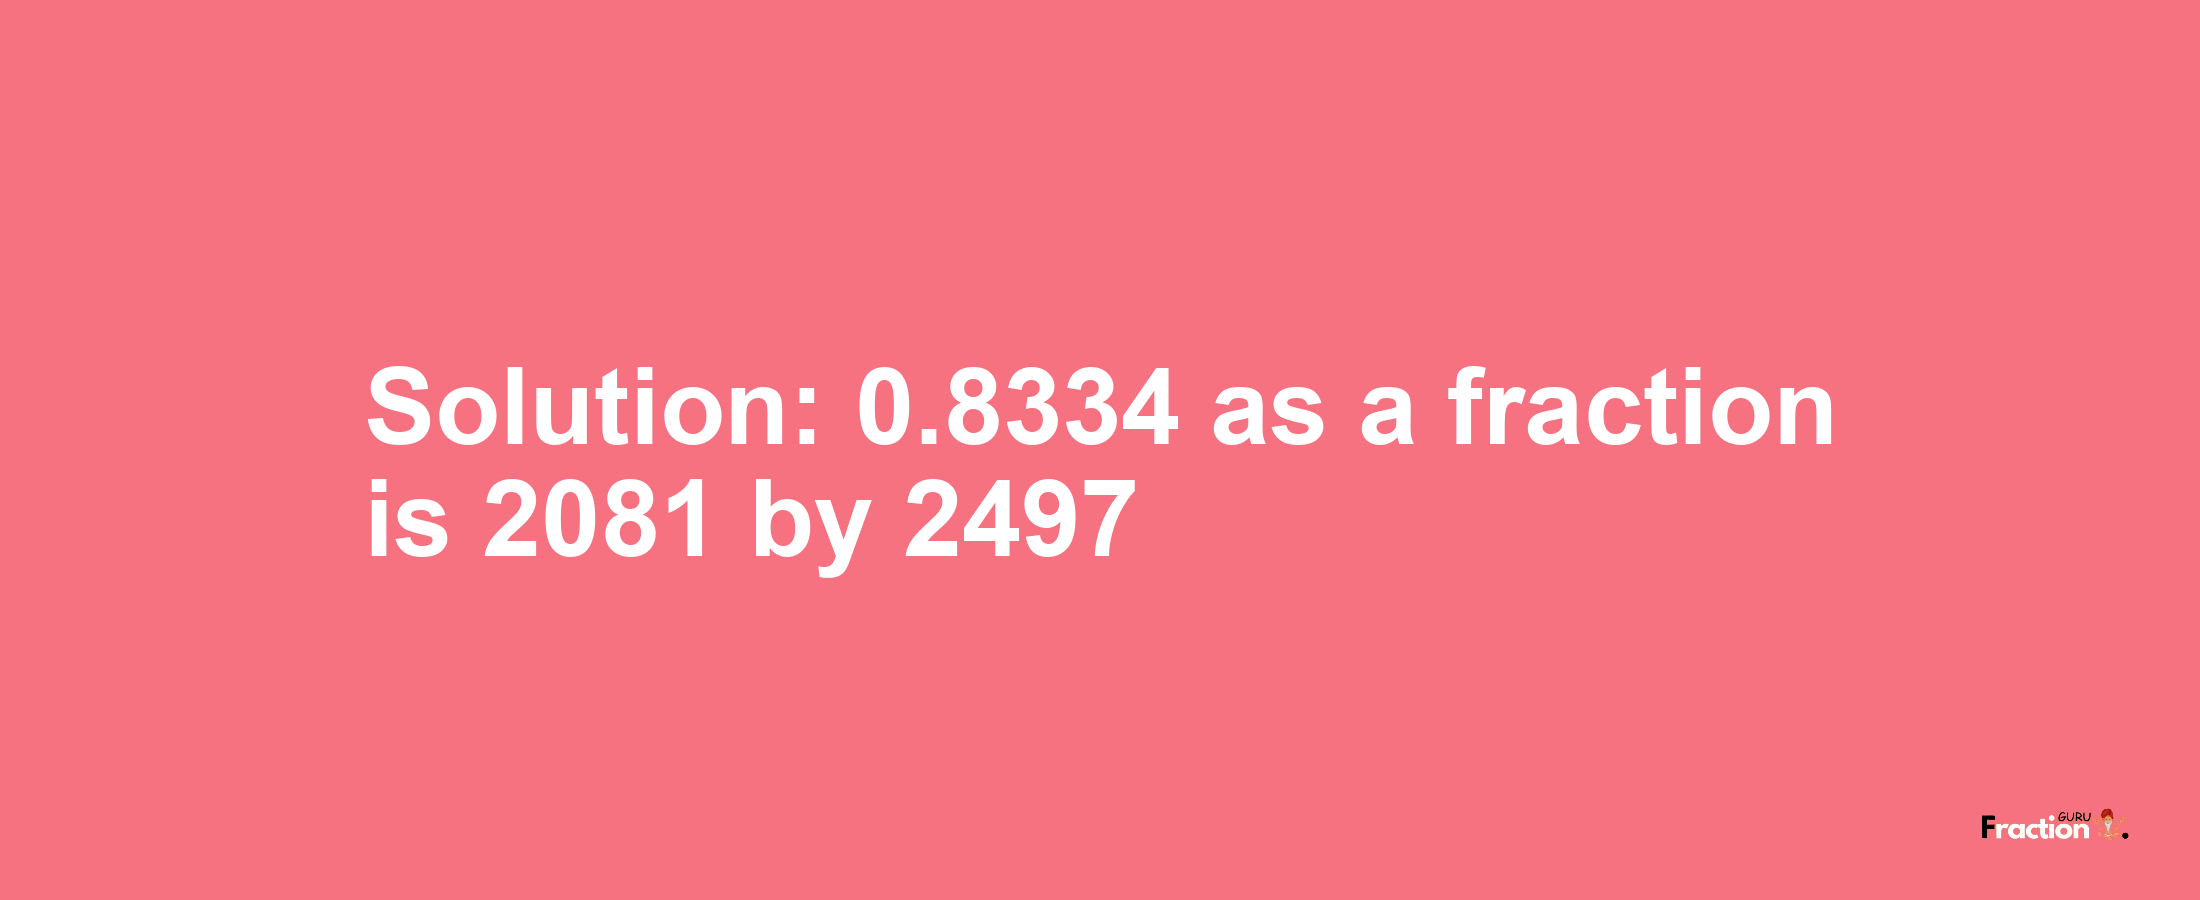 Solution:0.8334 as a fraction is 2081/2497